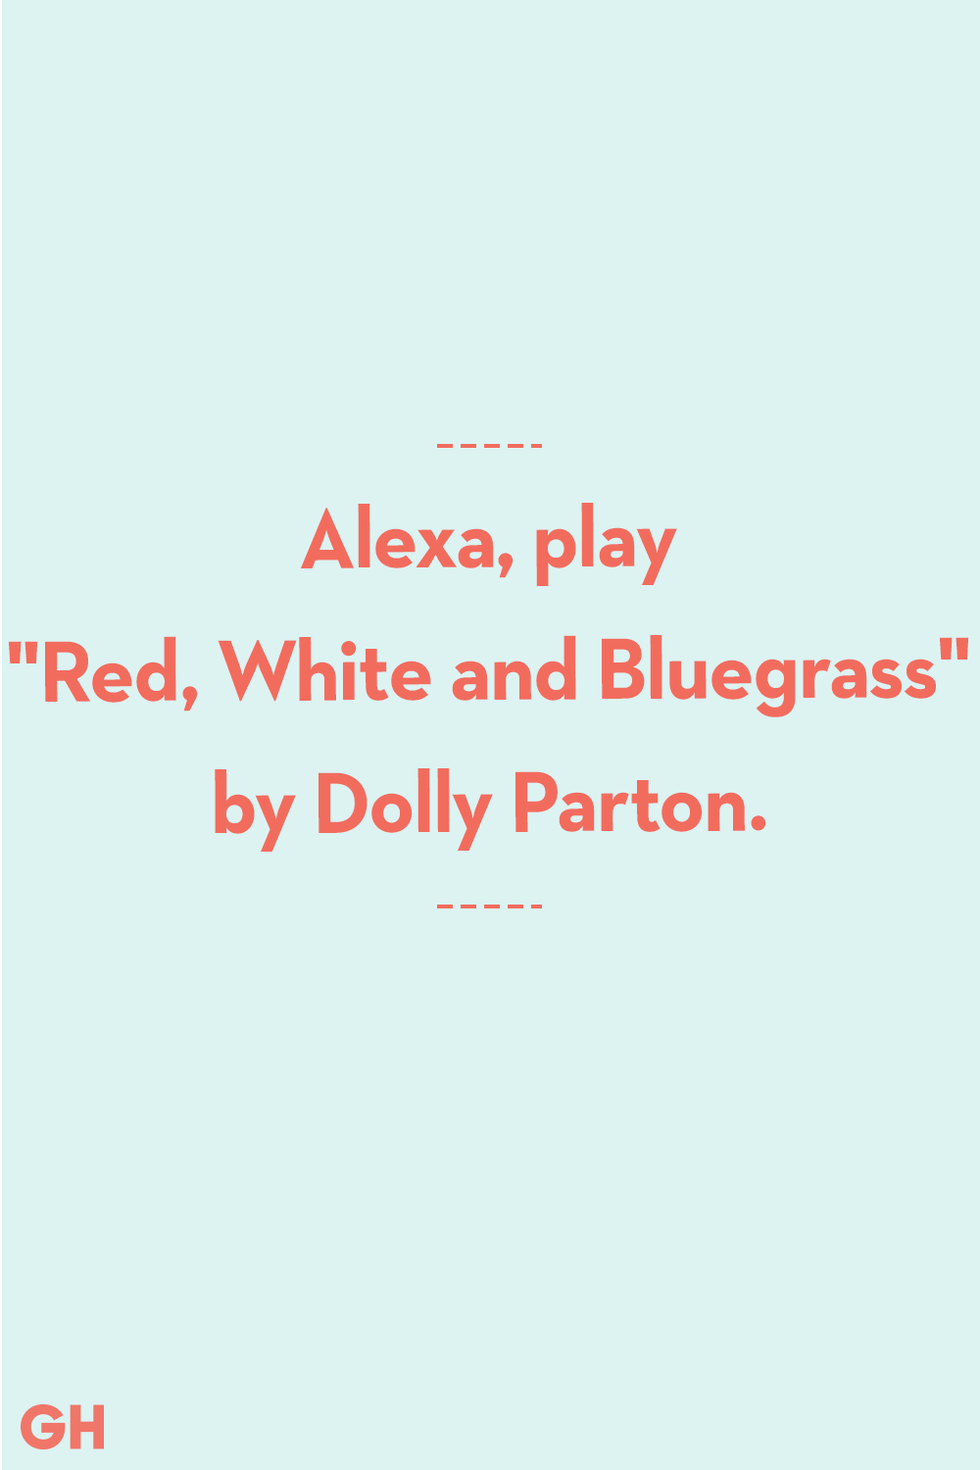 alexa, play "red, white and bluegrass" by dolly parton quote as a memorial day instagram caption